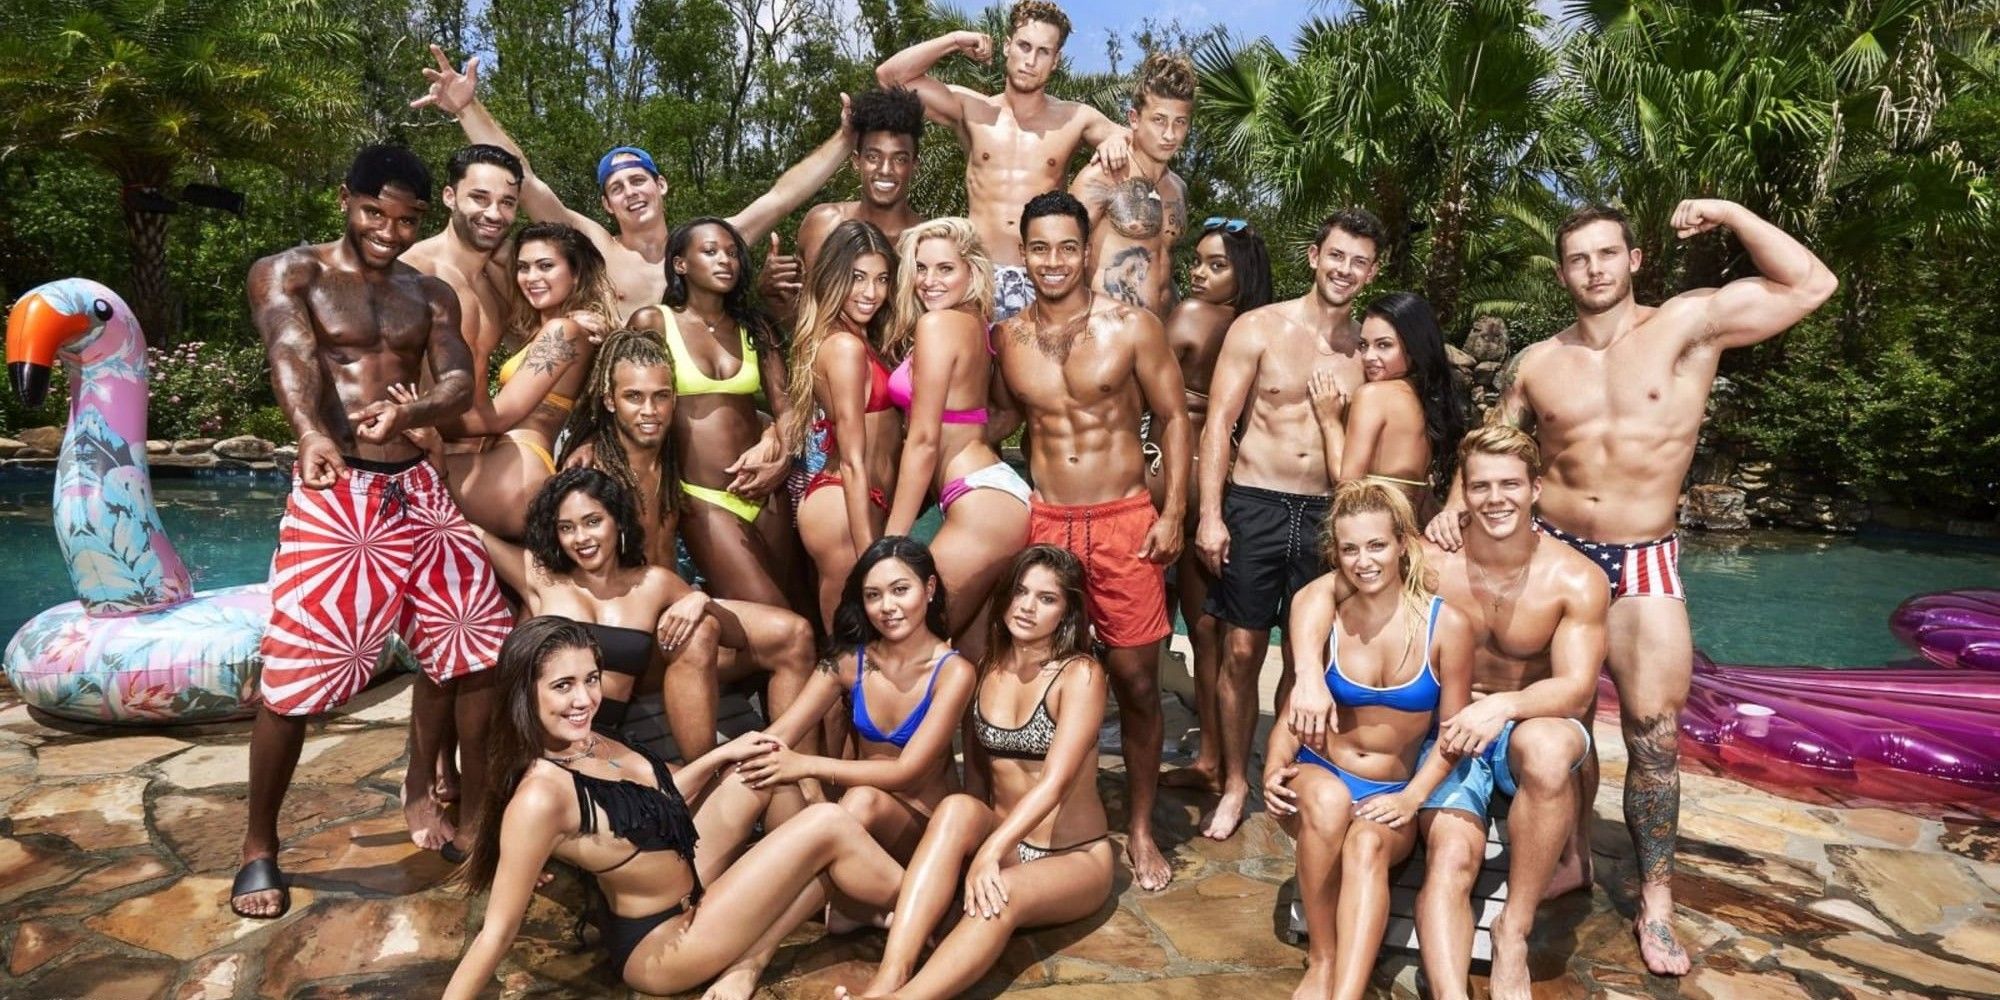 Are You The One full cast promo picture by the pool